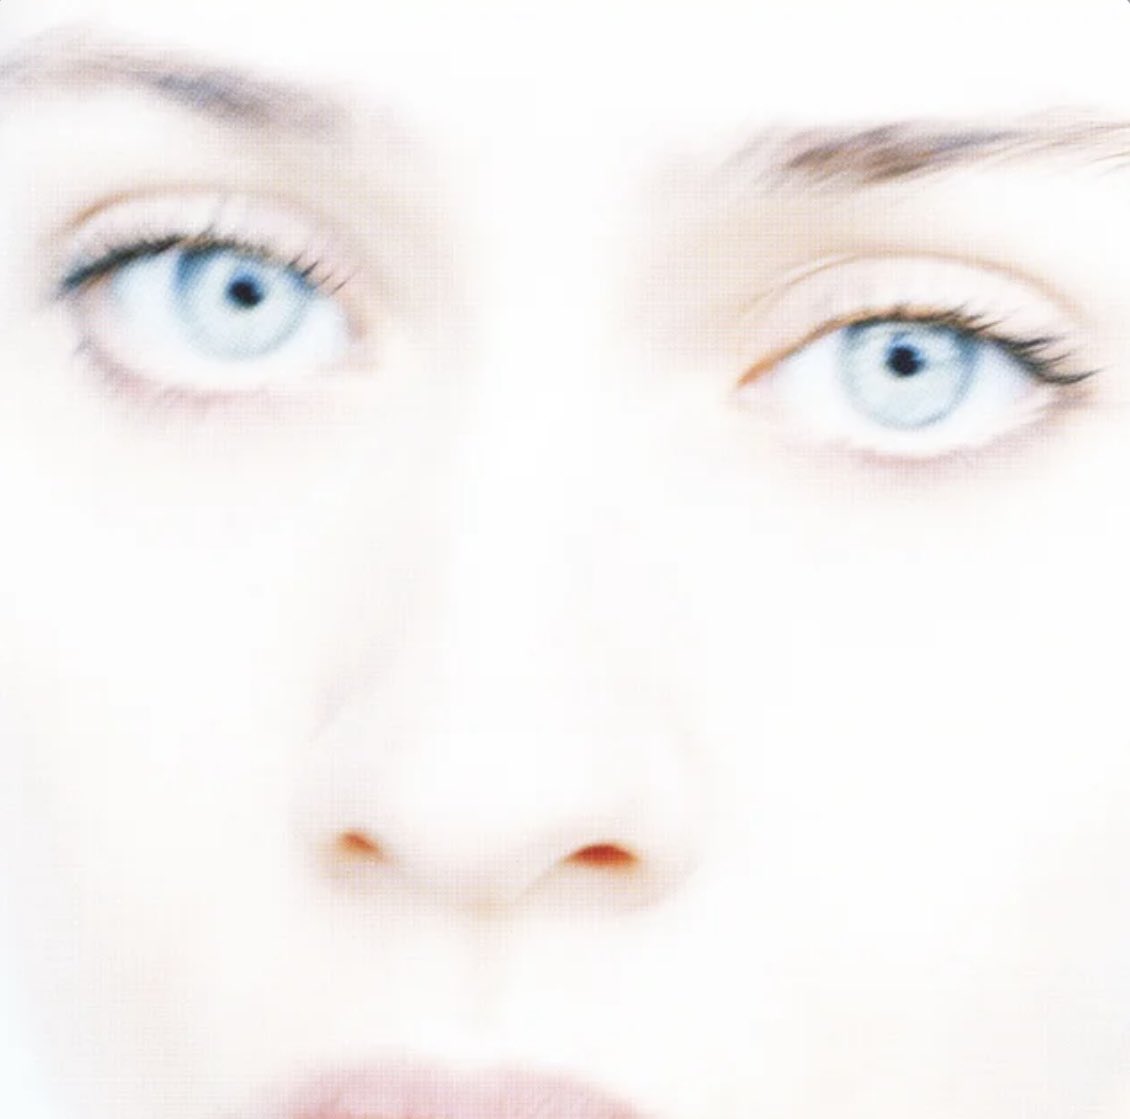 Tidal - Fiona Apple - 10/10
This is high art. Genuinely amazing lyricism, composition, production and instrumentation. She goes through melancholy to rage seamlessly and her voice shines here. So lush and detail oriented, truly a classic. 
Favs: Slow Like Honey, Sleep To Dream